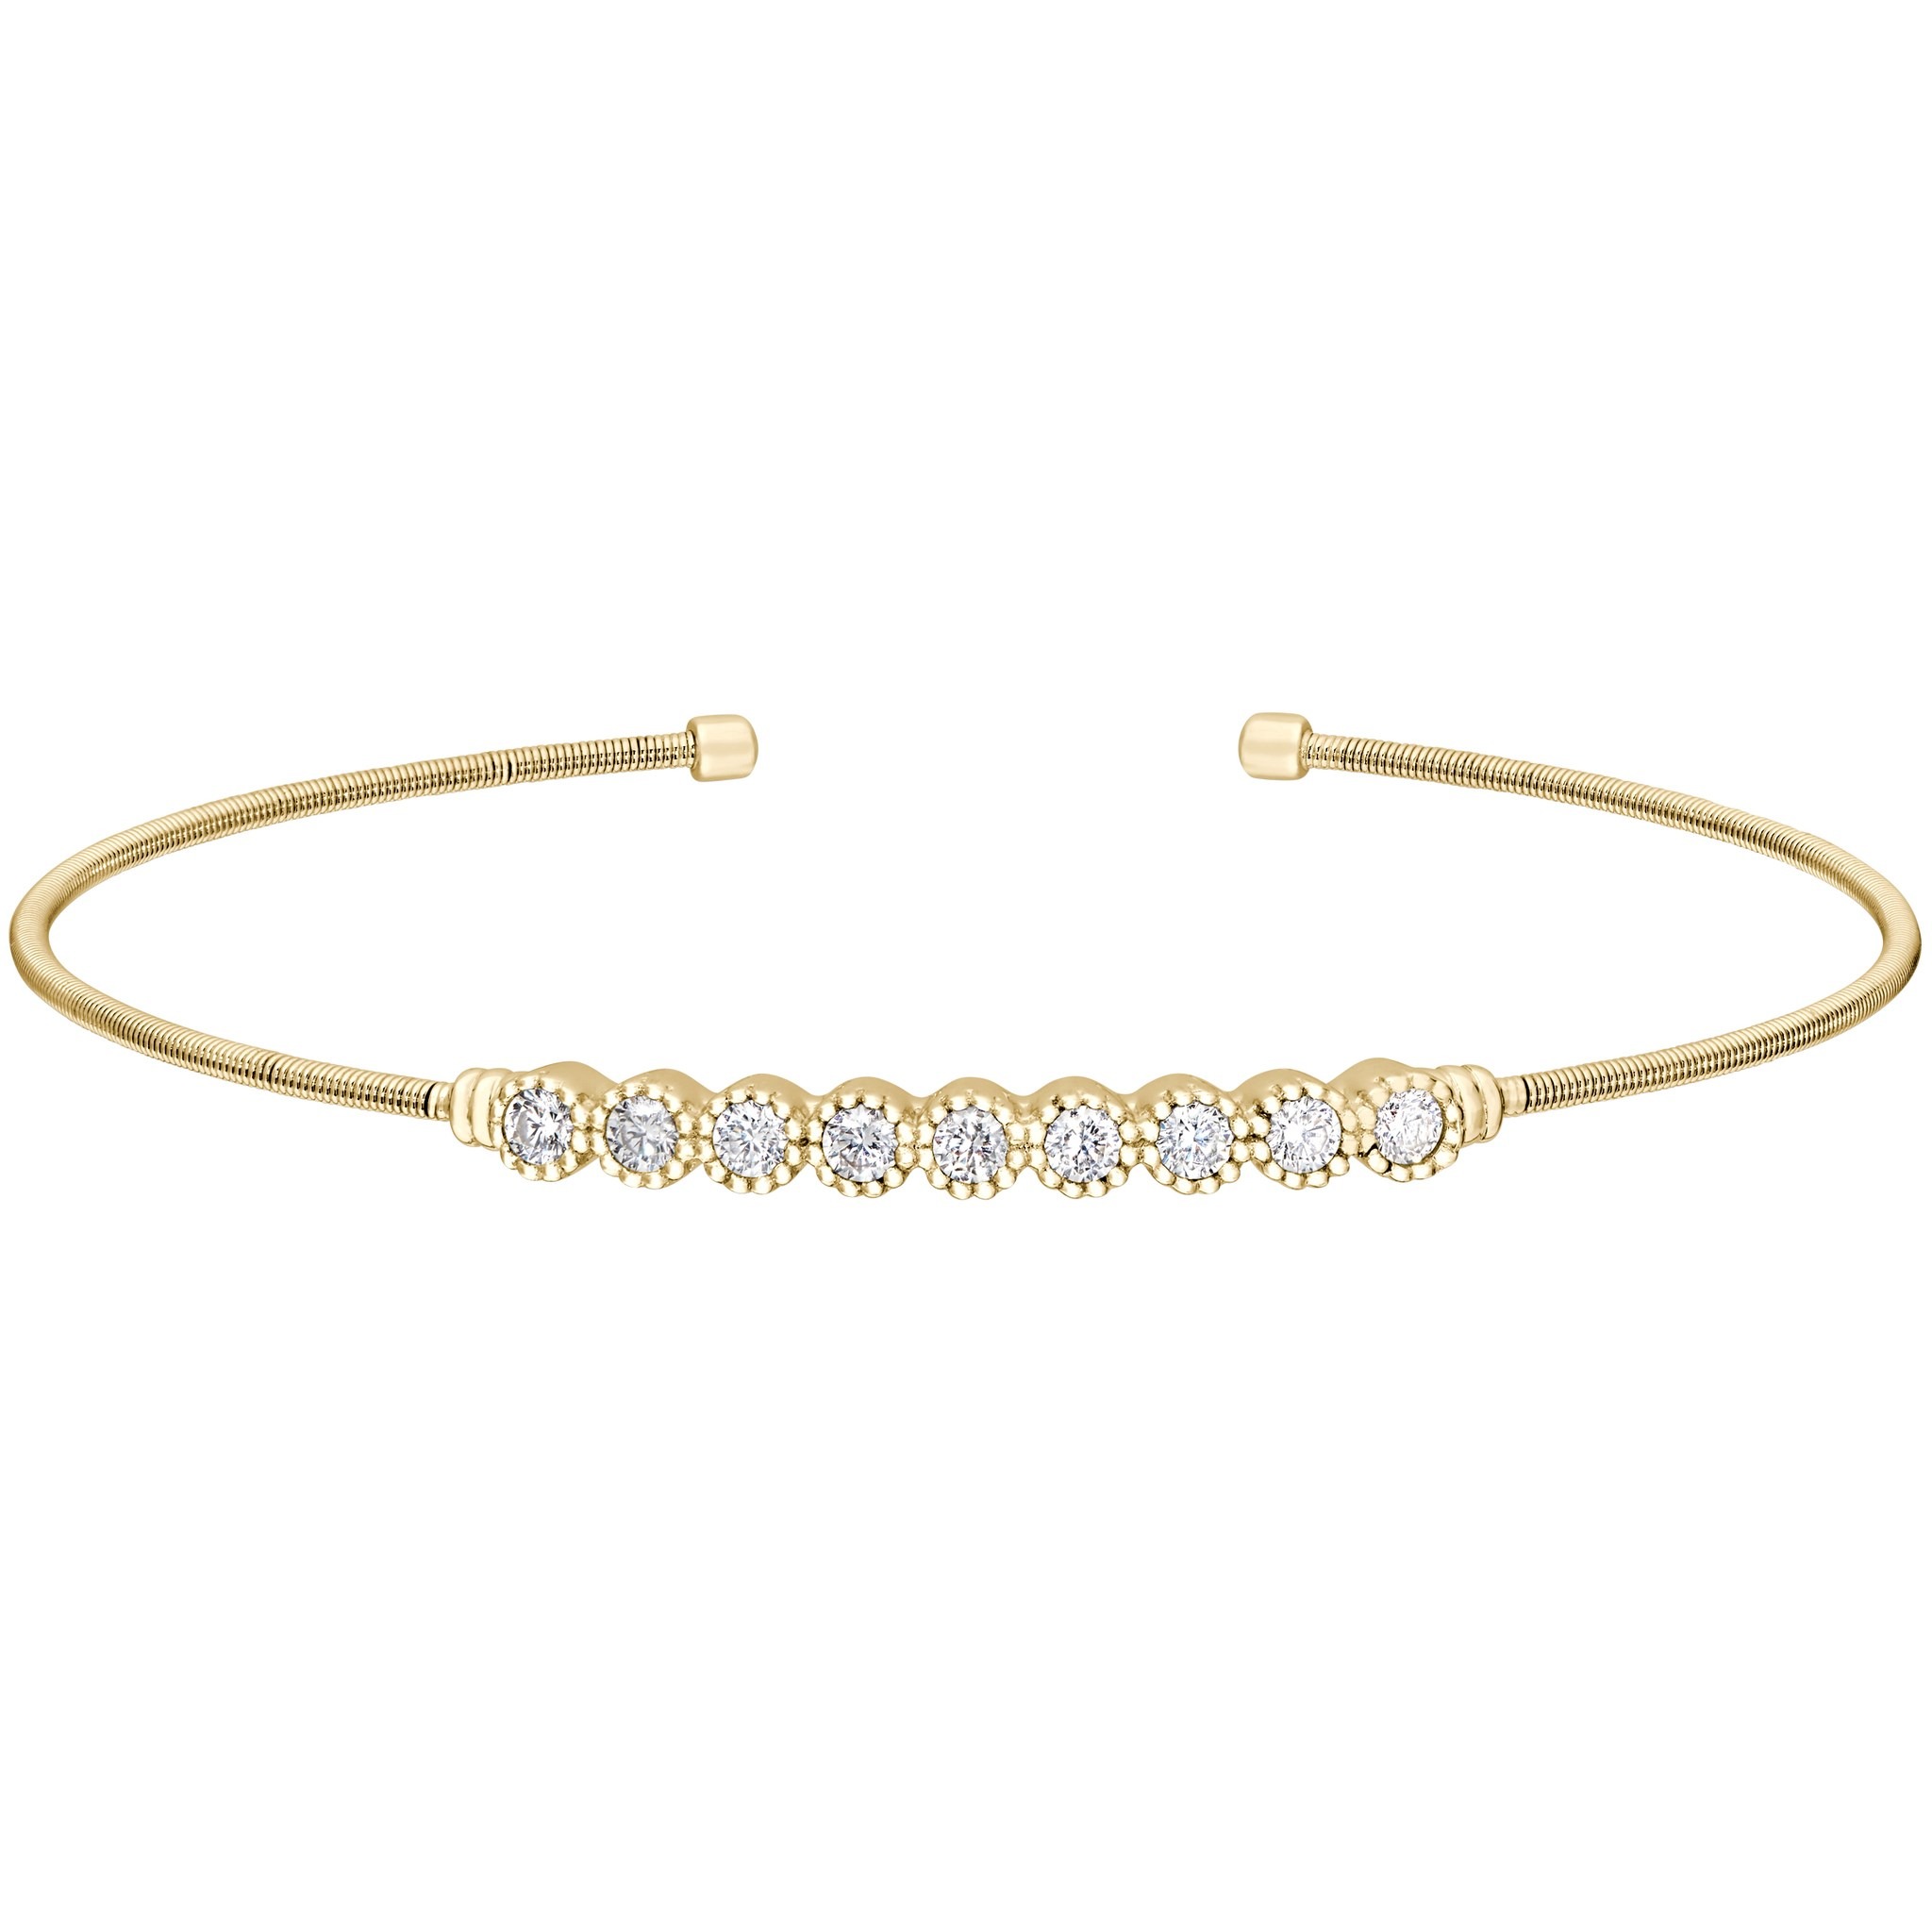 Gold Finish Sterling Silver Cable Cuff Bracelet with Beaded Bezel Set Simulated Diamonds